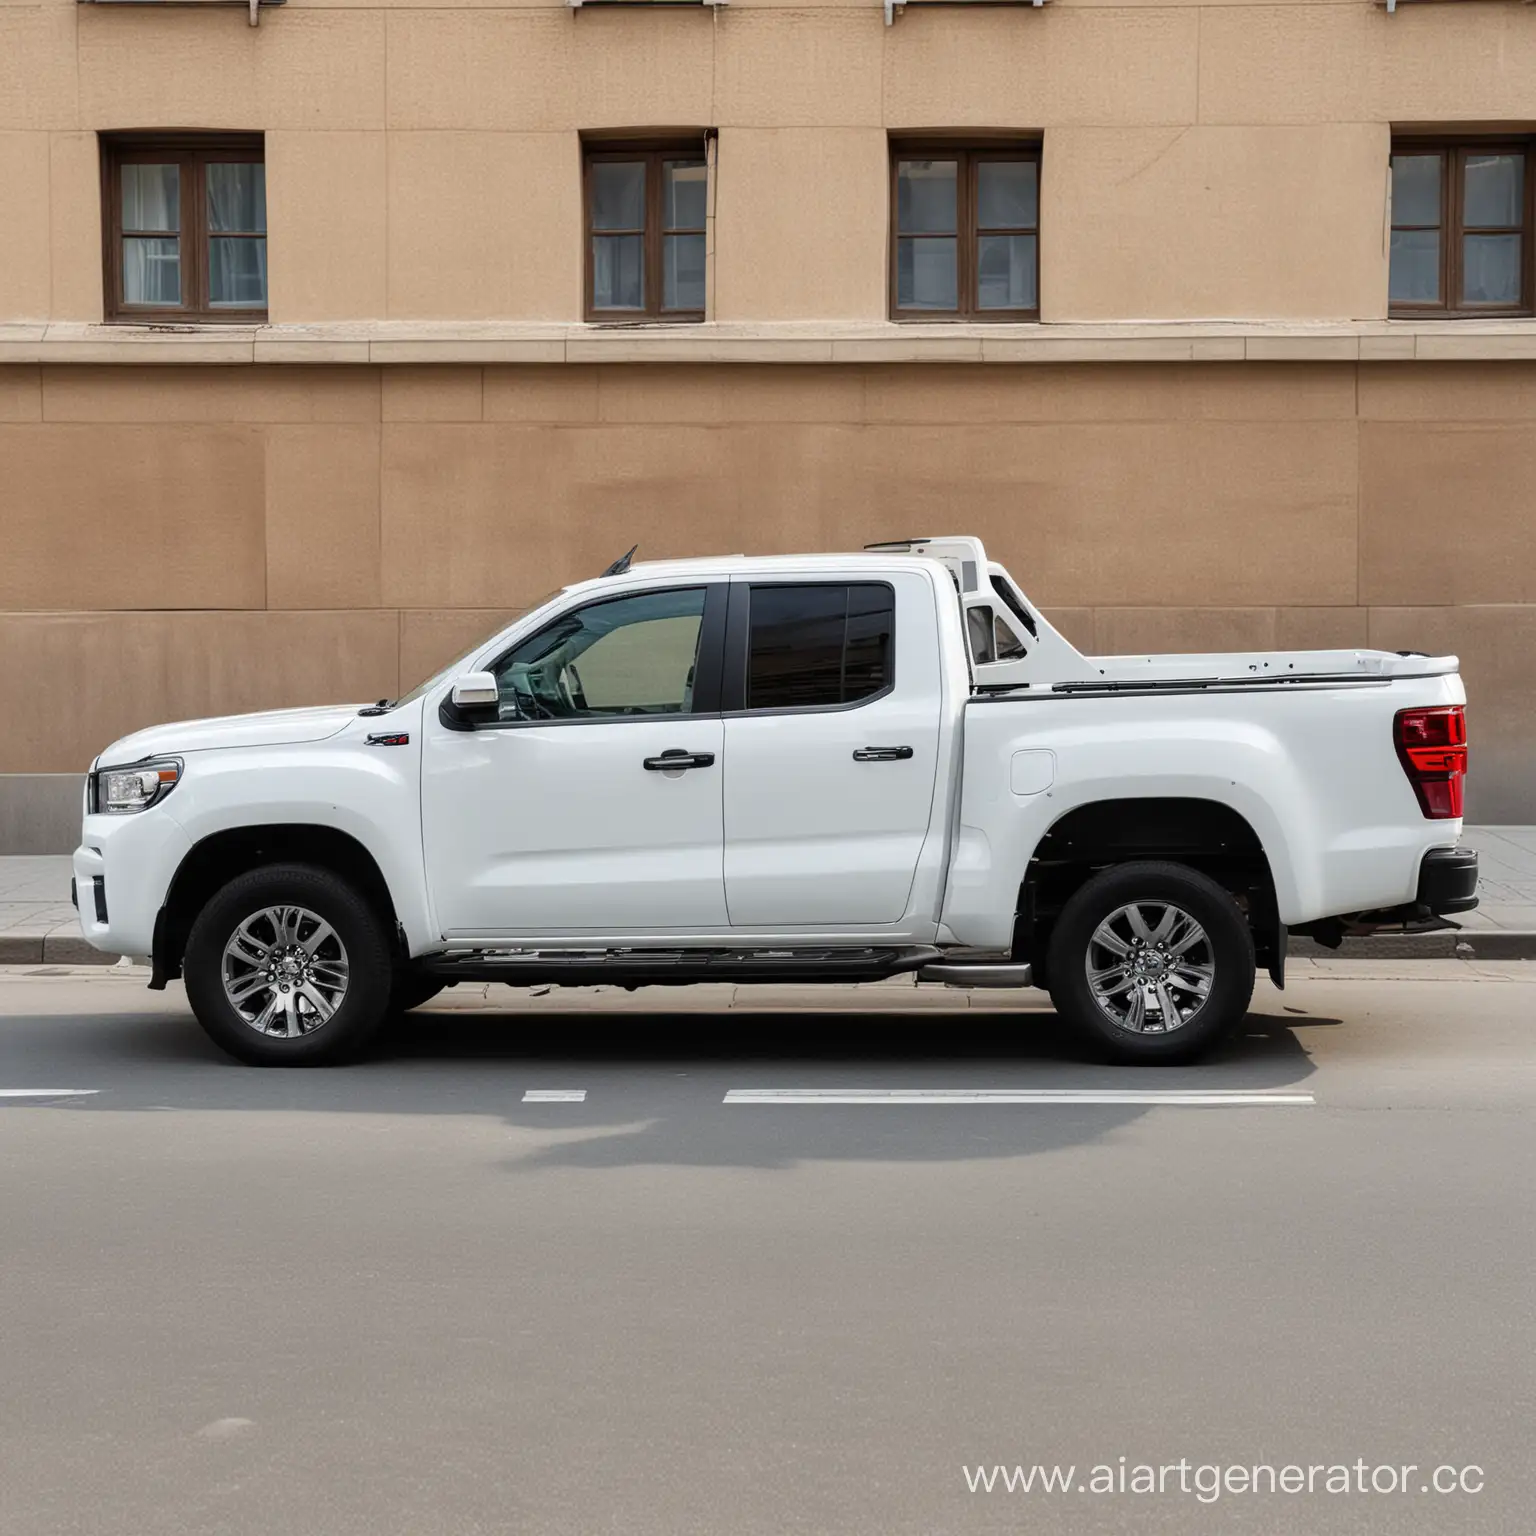 New-White-Pickup-Truck-Parked-on-City-Street